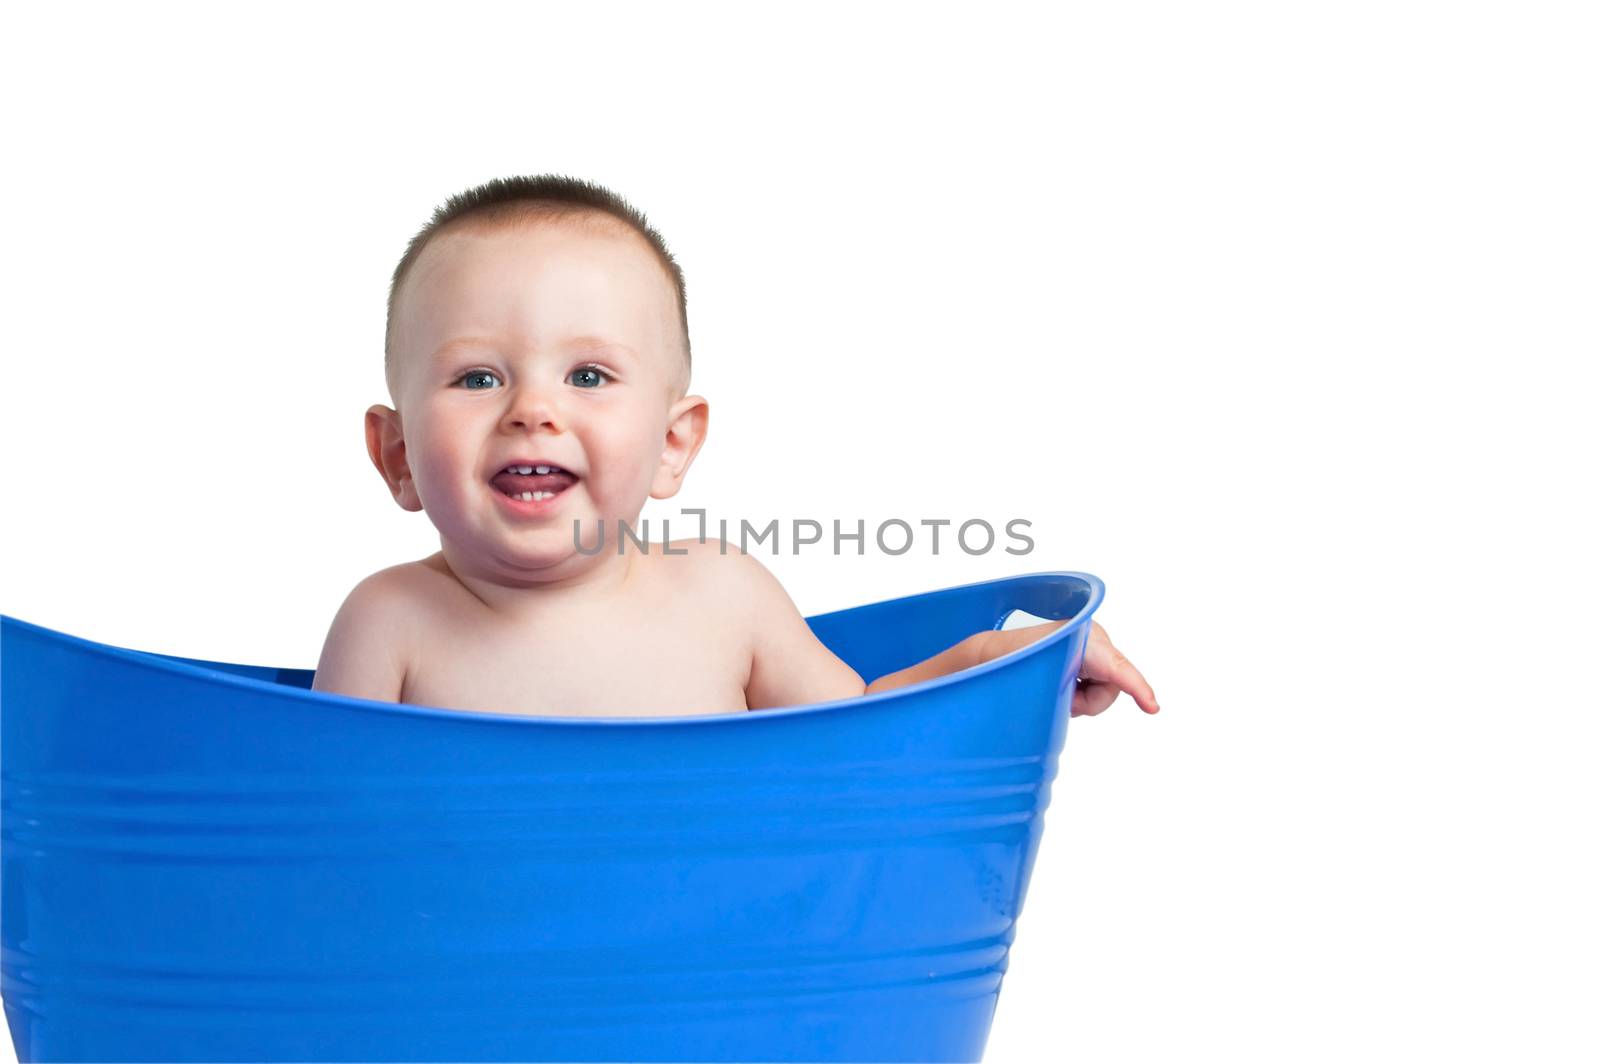 A cute baby boy playing in a blue plastic laundry basket